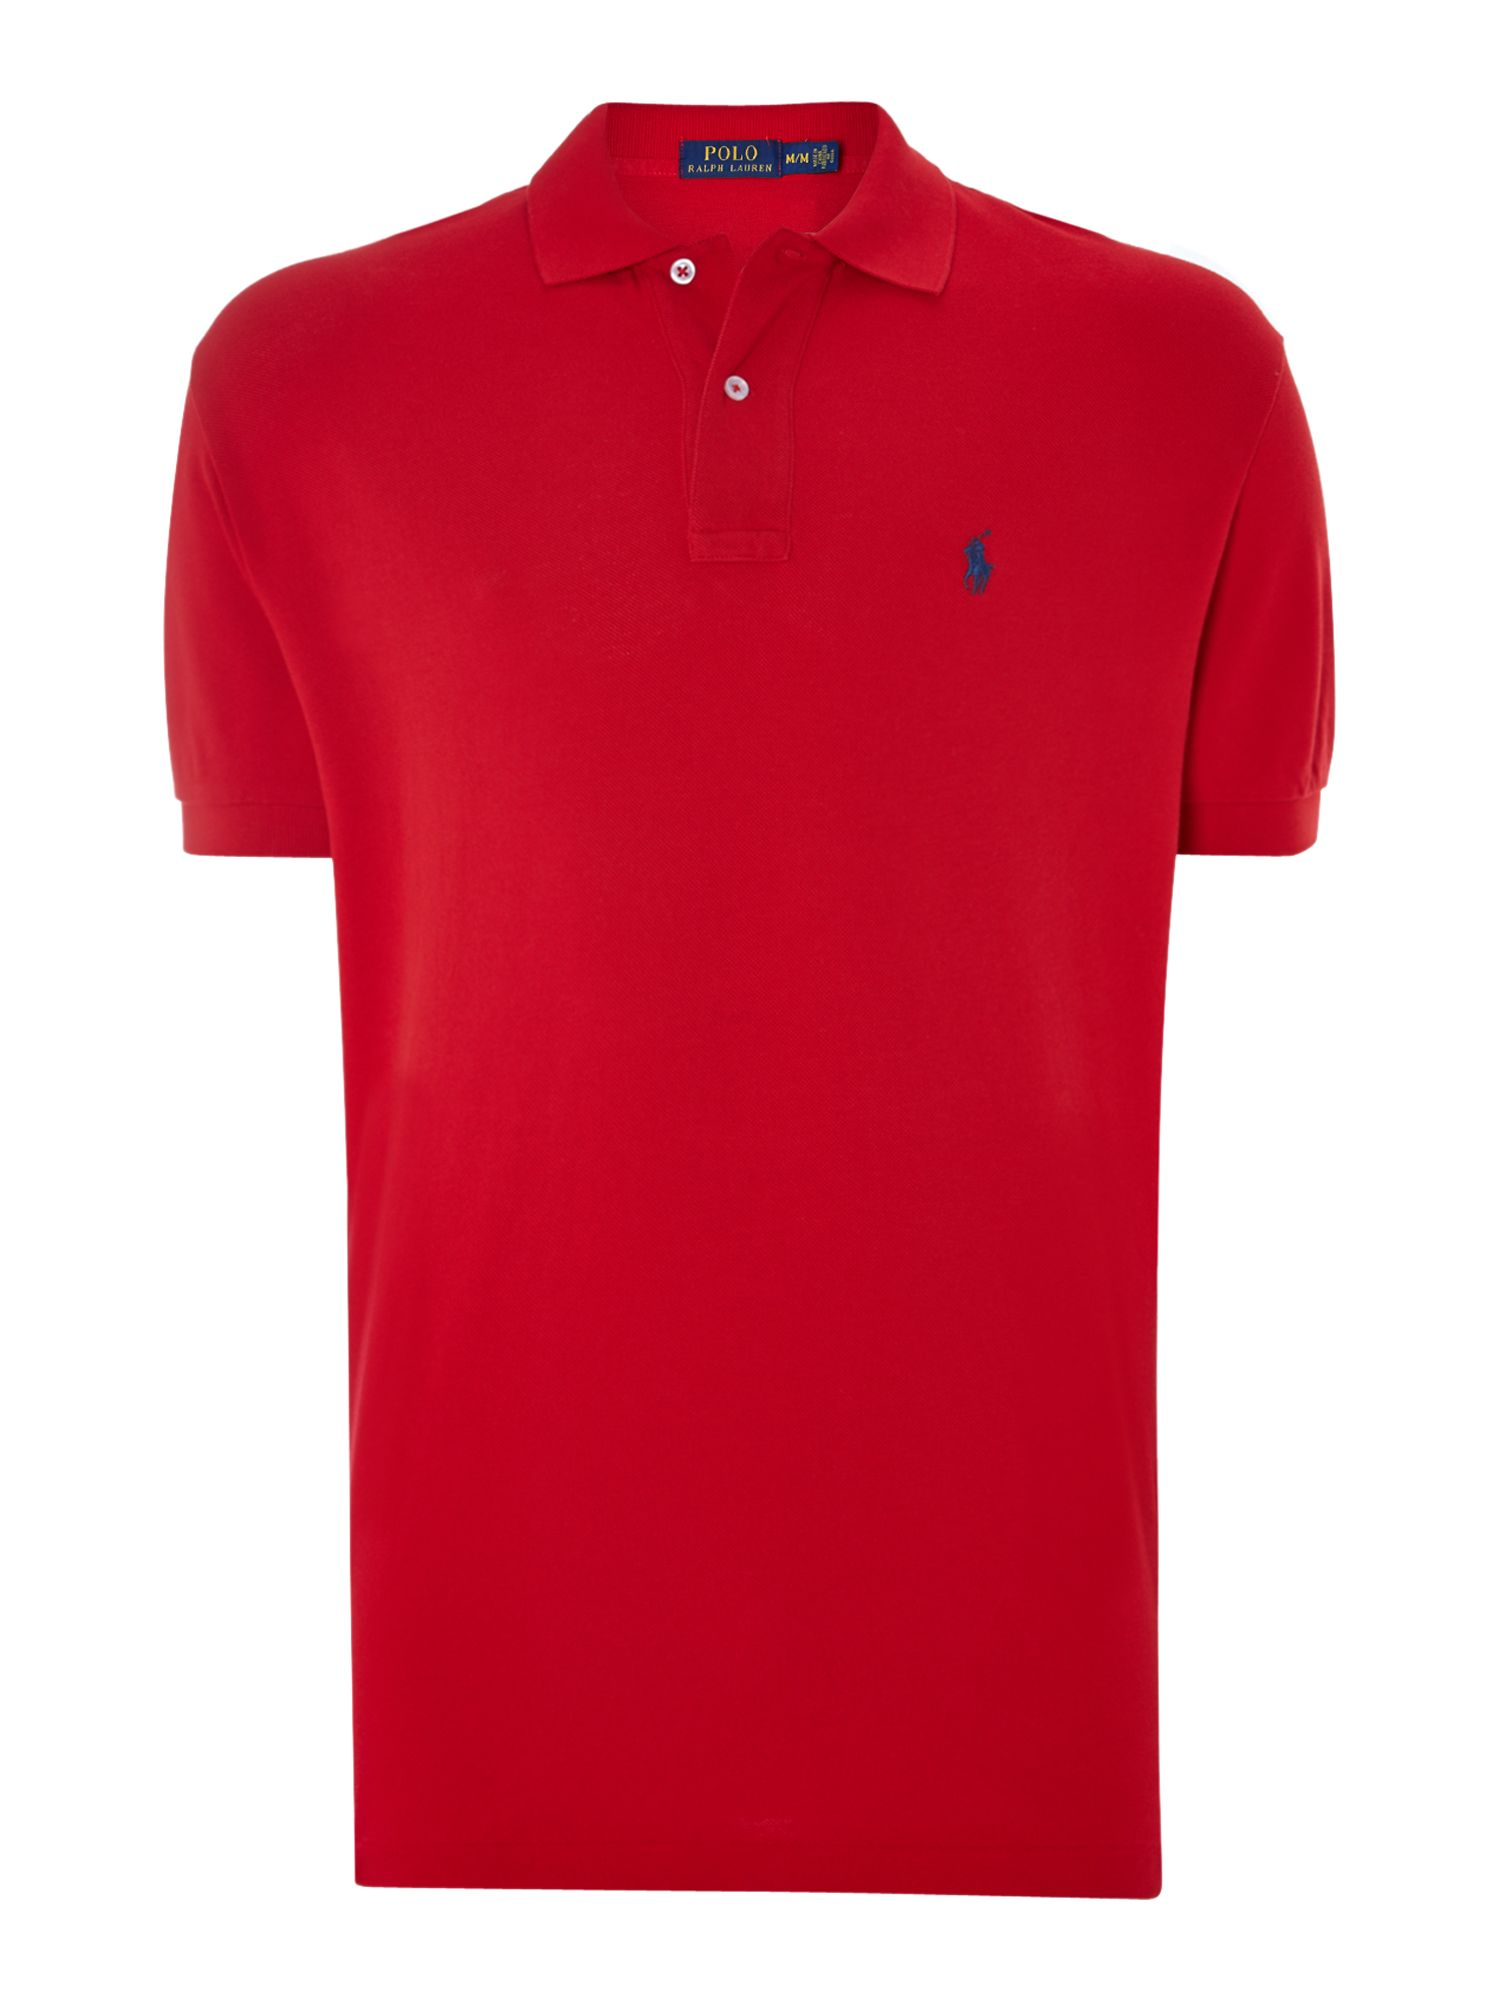 Polo ralph lauren Classic Fit Knit Collar Polo Shirt in Red for ...